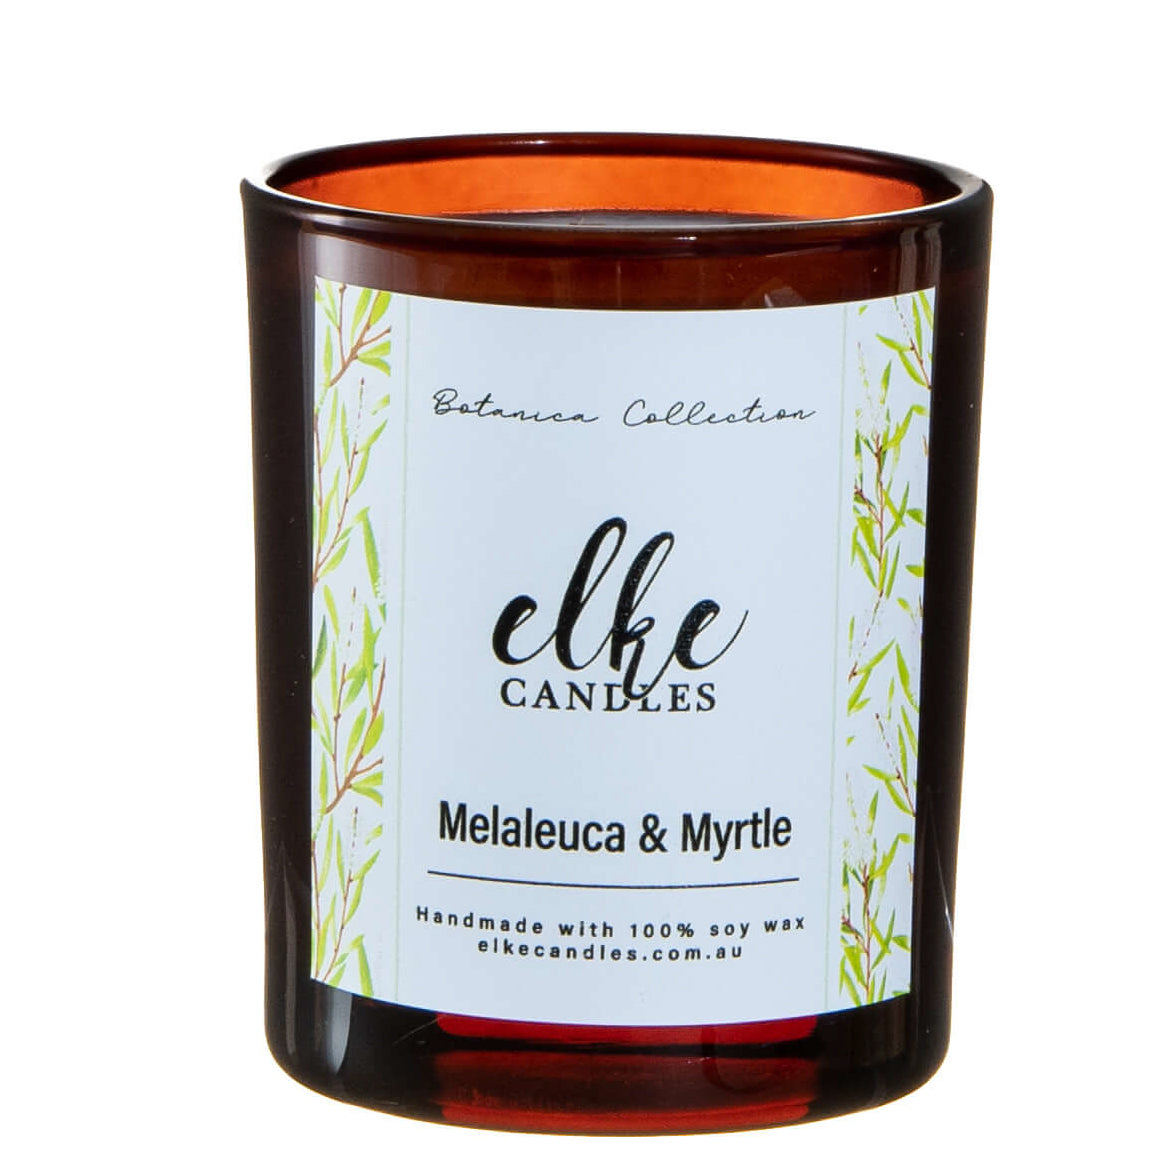 Botanica Collection Petite Soy Candle